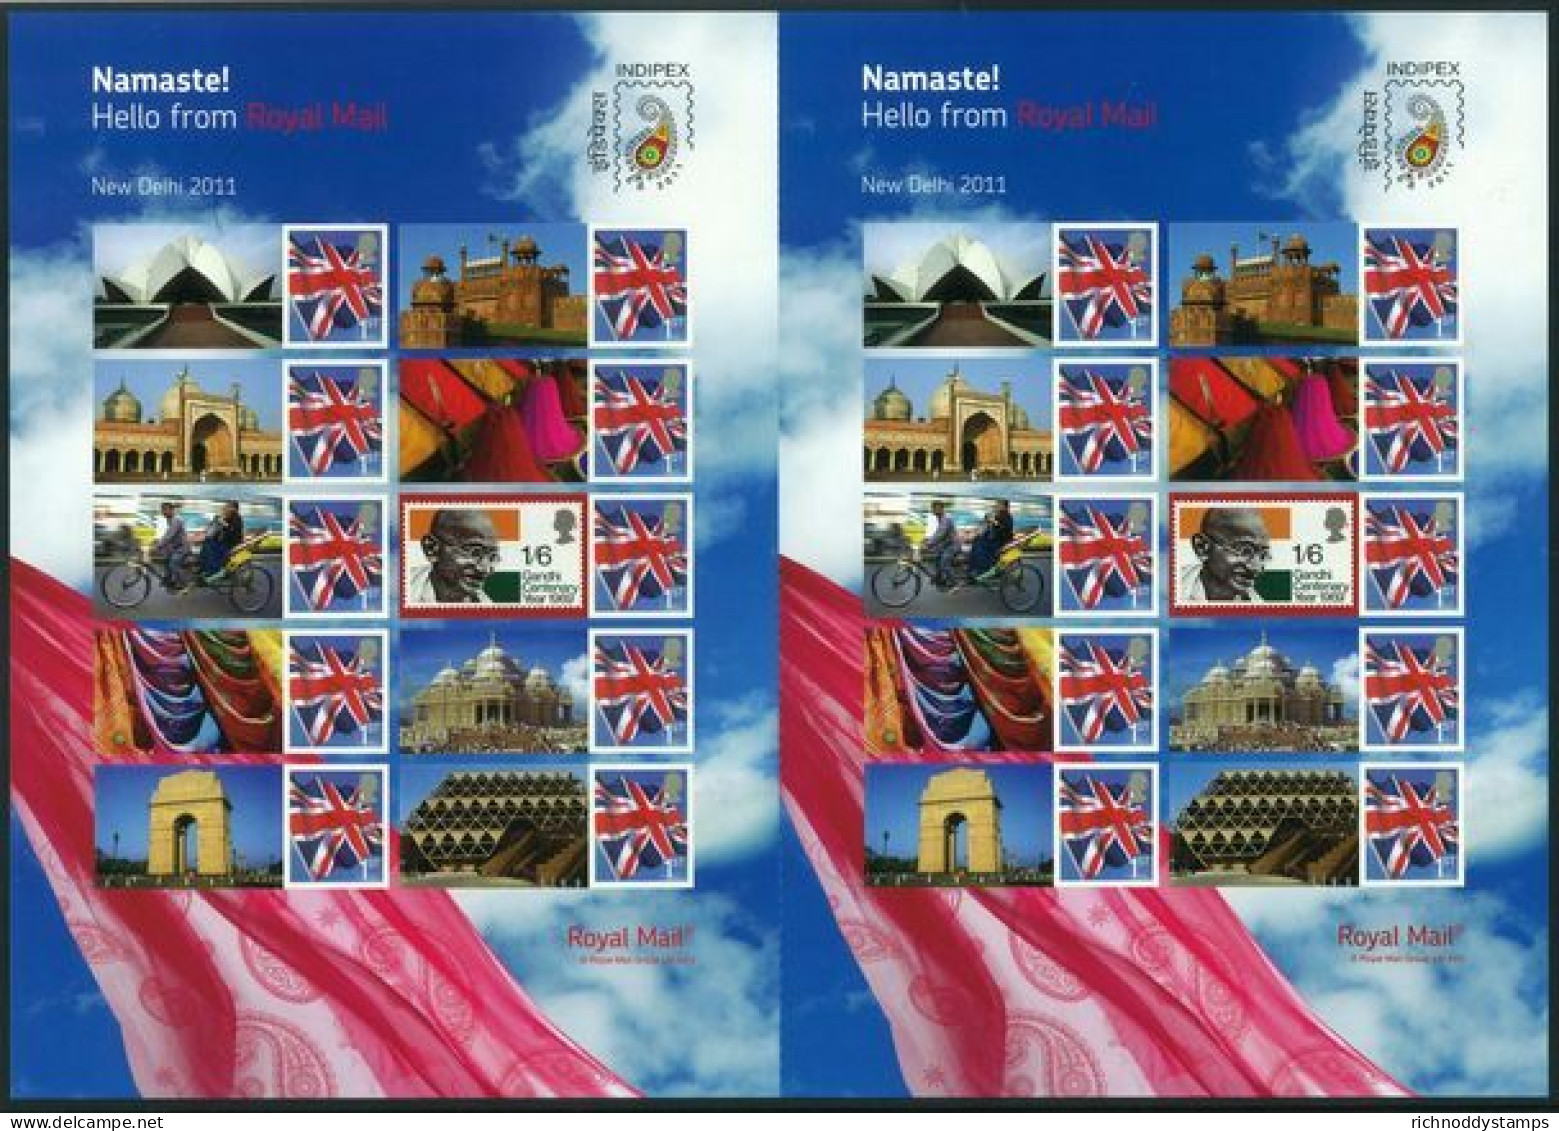 2011 Indipex Union Jack Stamps Smiler Unmounted Mint.  - Smilers Sheets